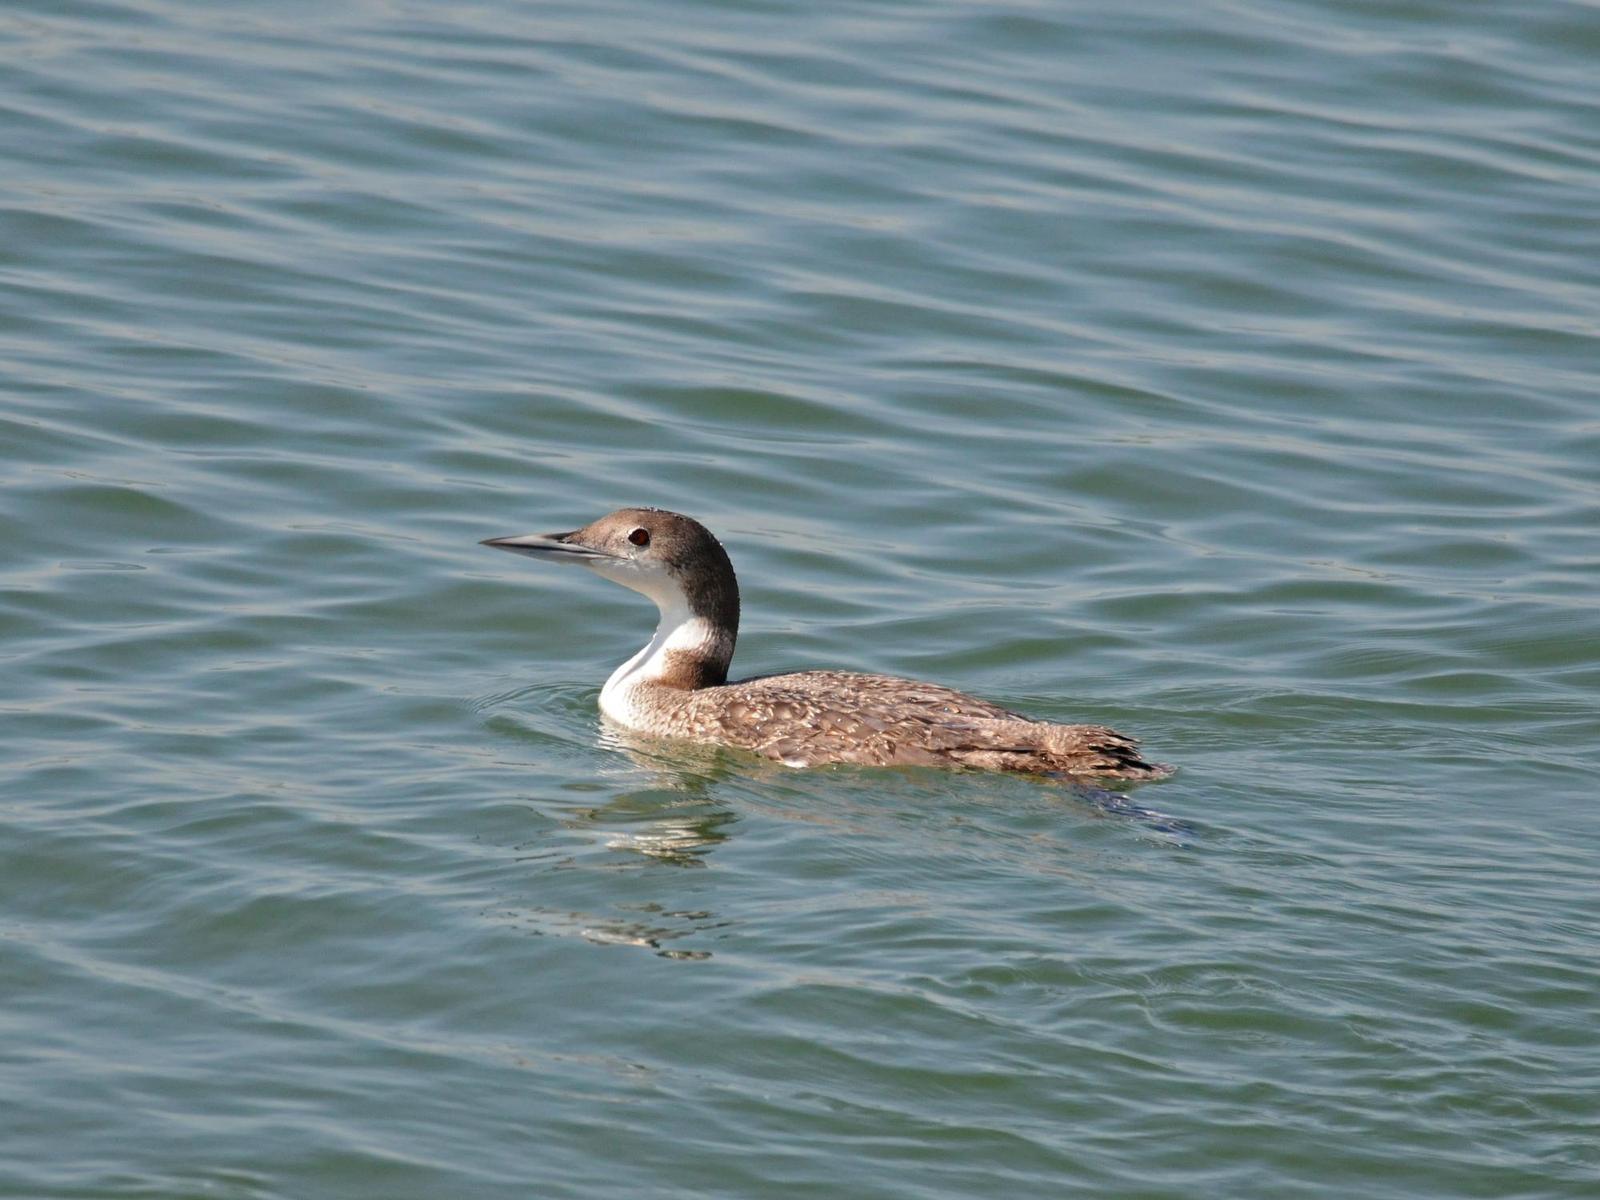 Common Loon Photo by Steven Mlodinow